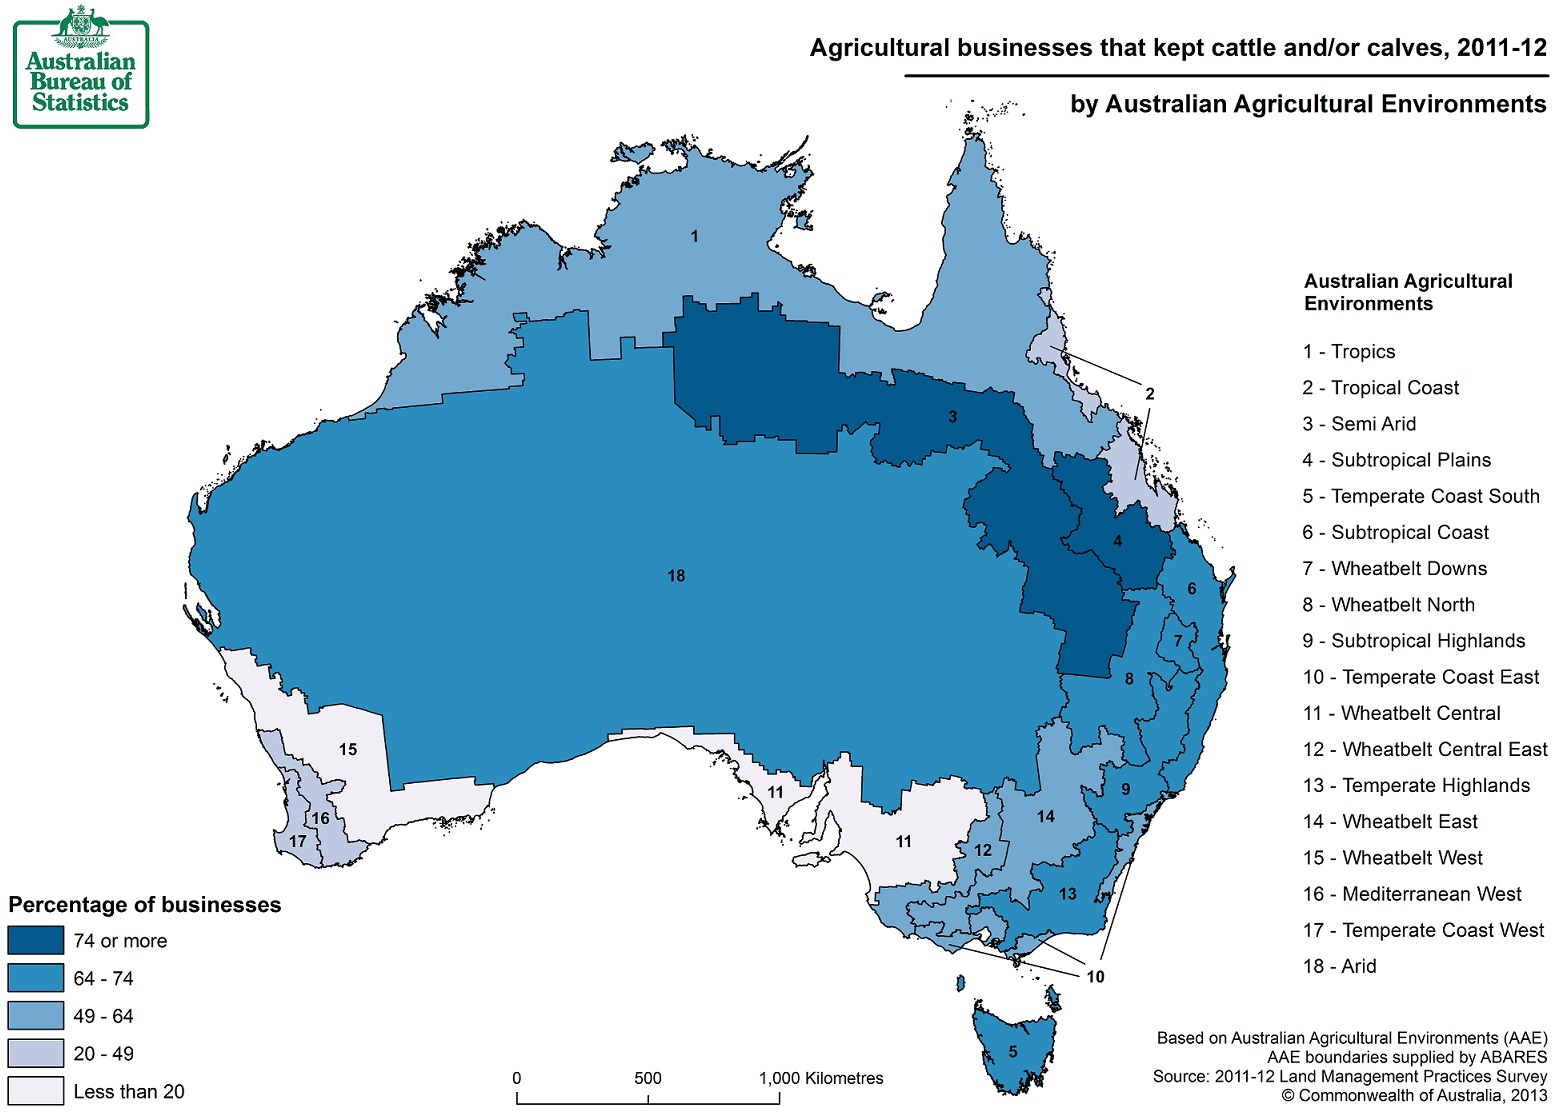 Image: Map of farms with cattle/calves